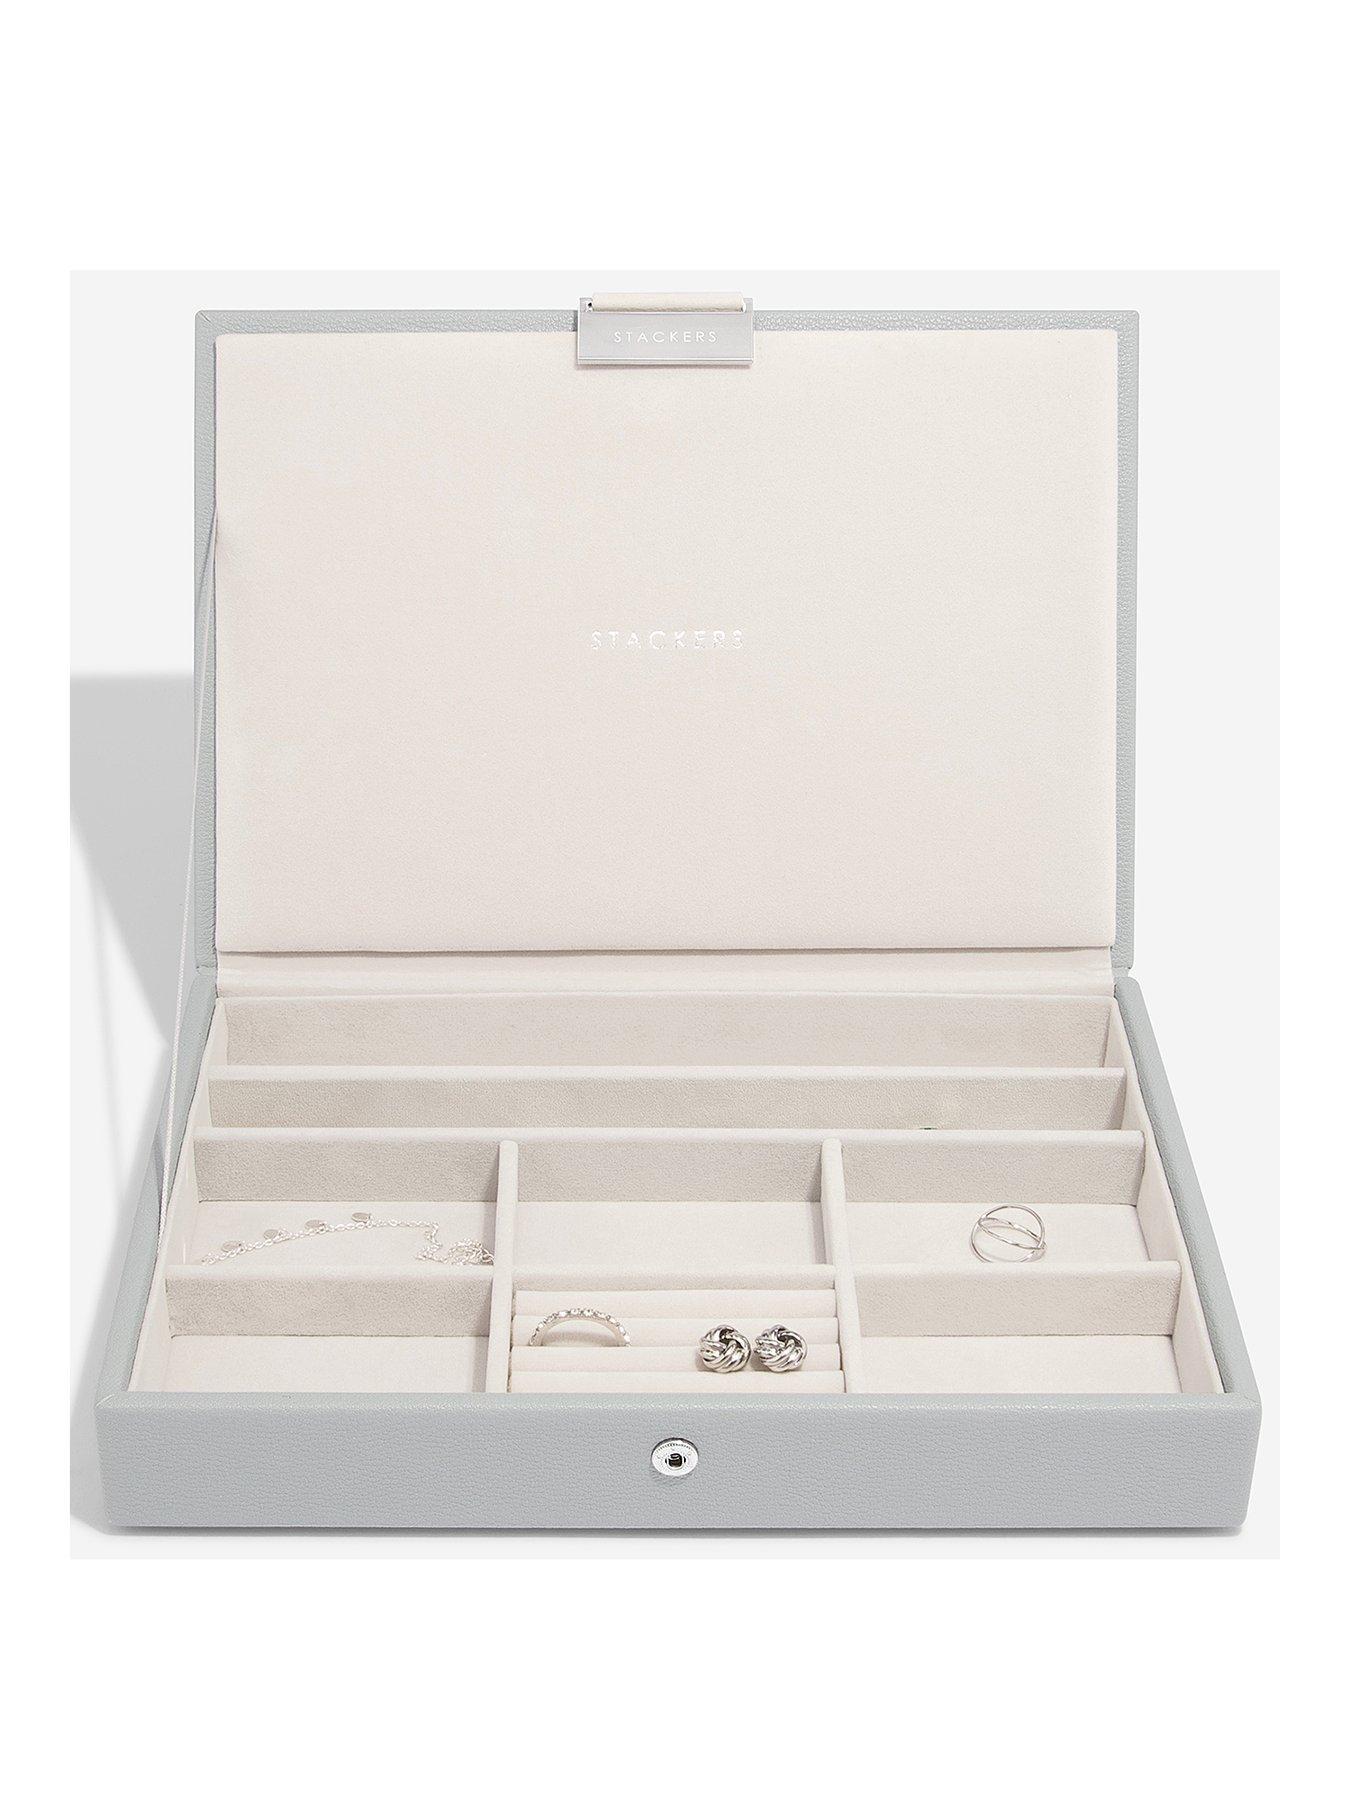 Jewellery & watches Stackers Pebble Grey Medium Classic Jewellery Box with Lid